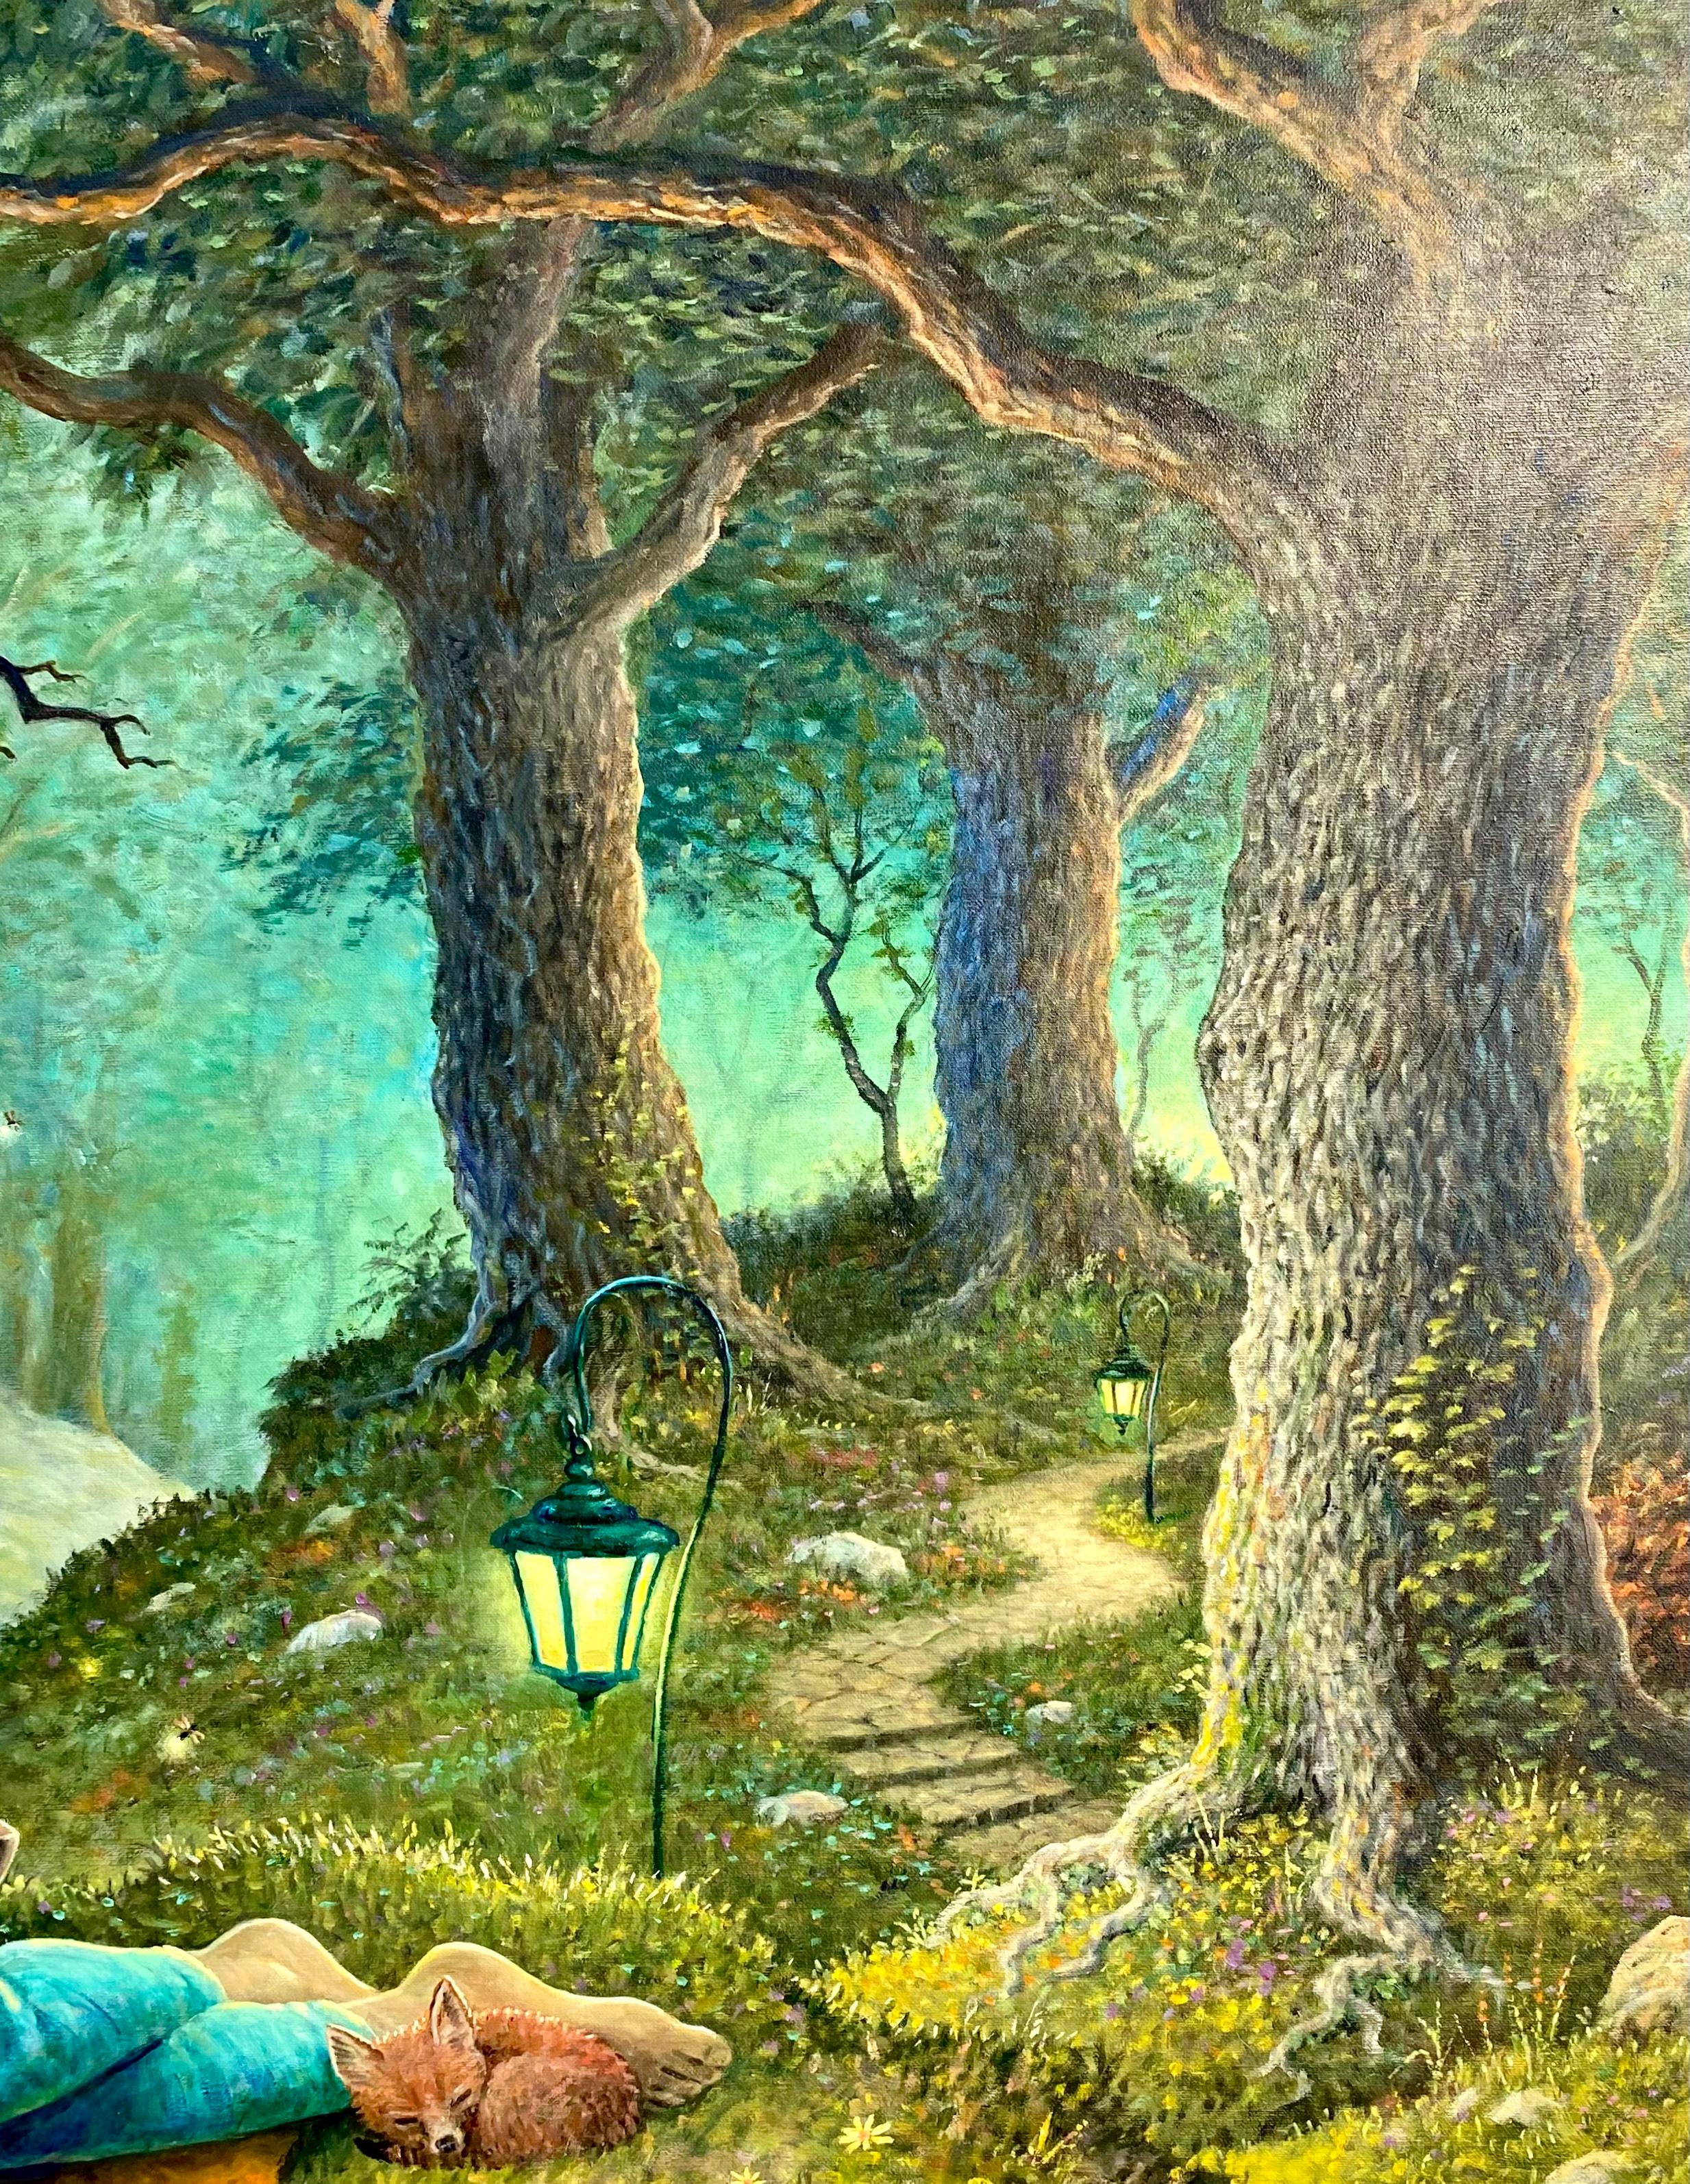 A woman relaxes on the ground in the forest. She has a small book and record player with her. A baby fox lays curled up at her feet and an owl sits nearby on a tree branch. A small stone path can be seen that winds through the forest, flanked by